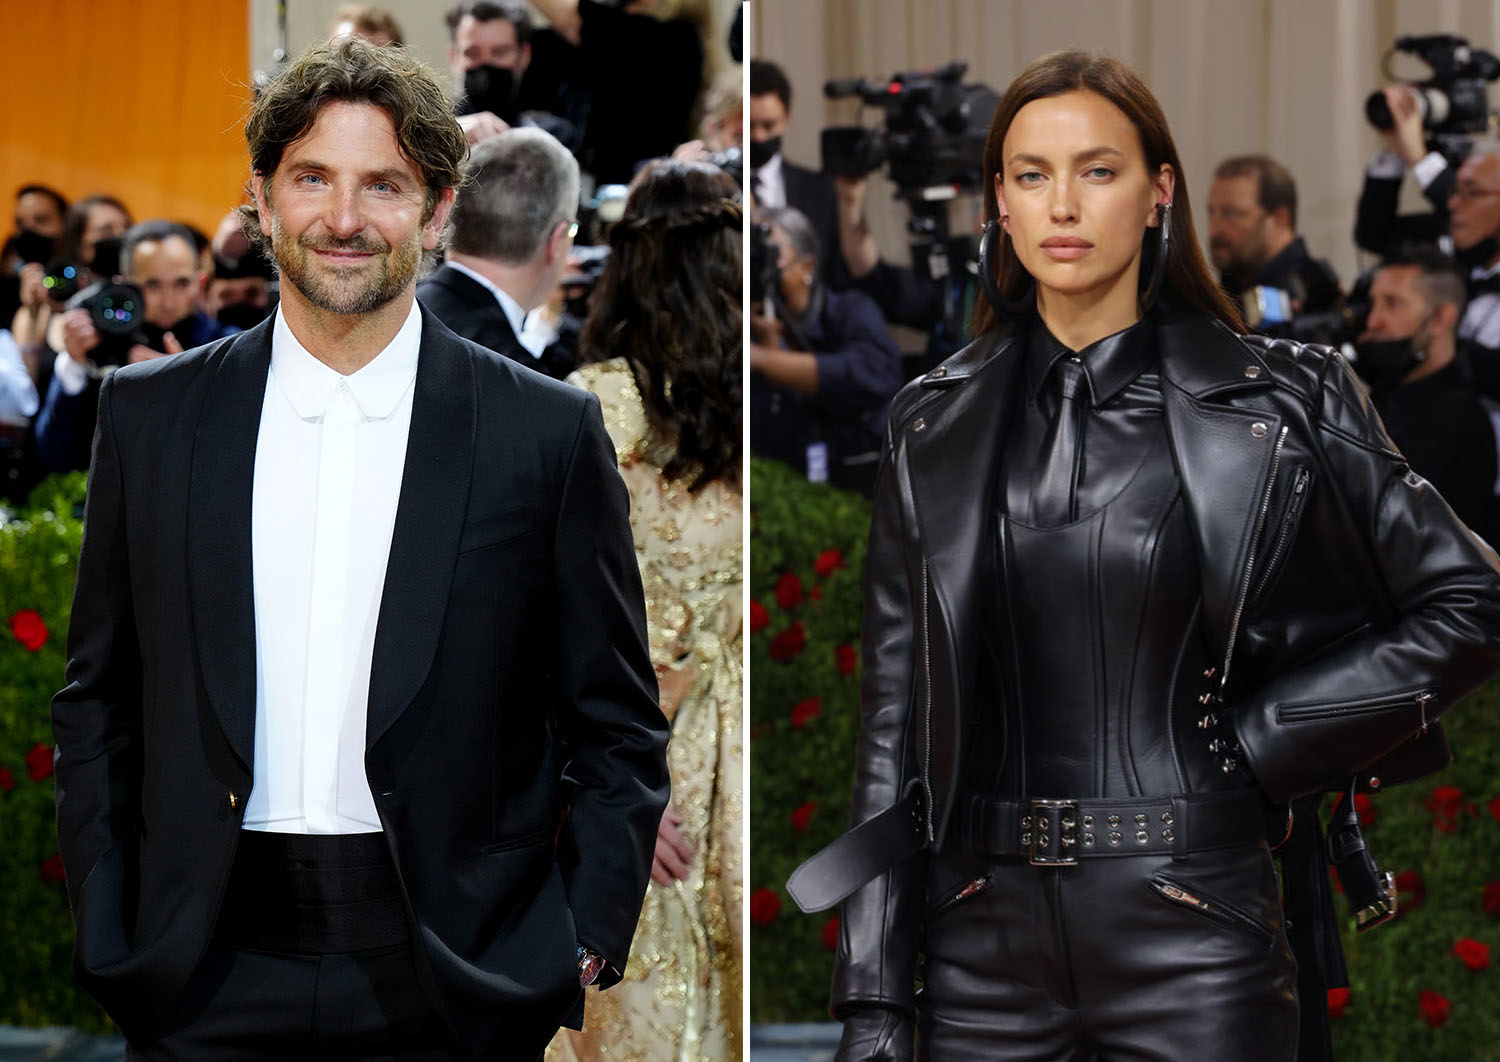 Bradley Cooper stands with his hands in his pockets; Irina Shayk stands with on hand on her hip